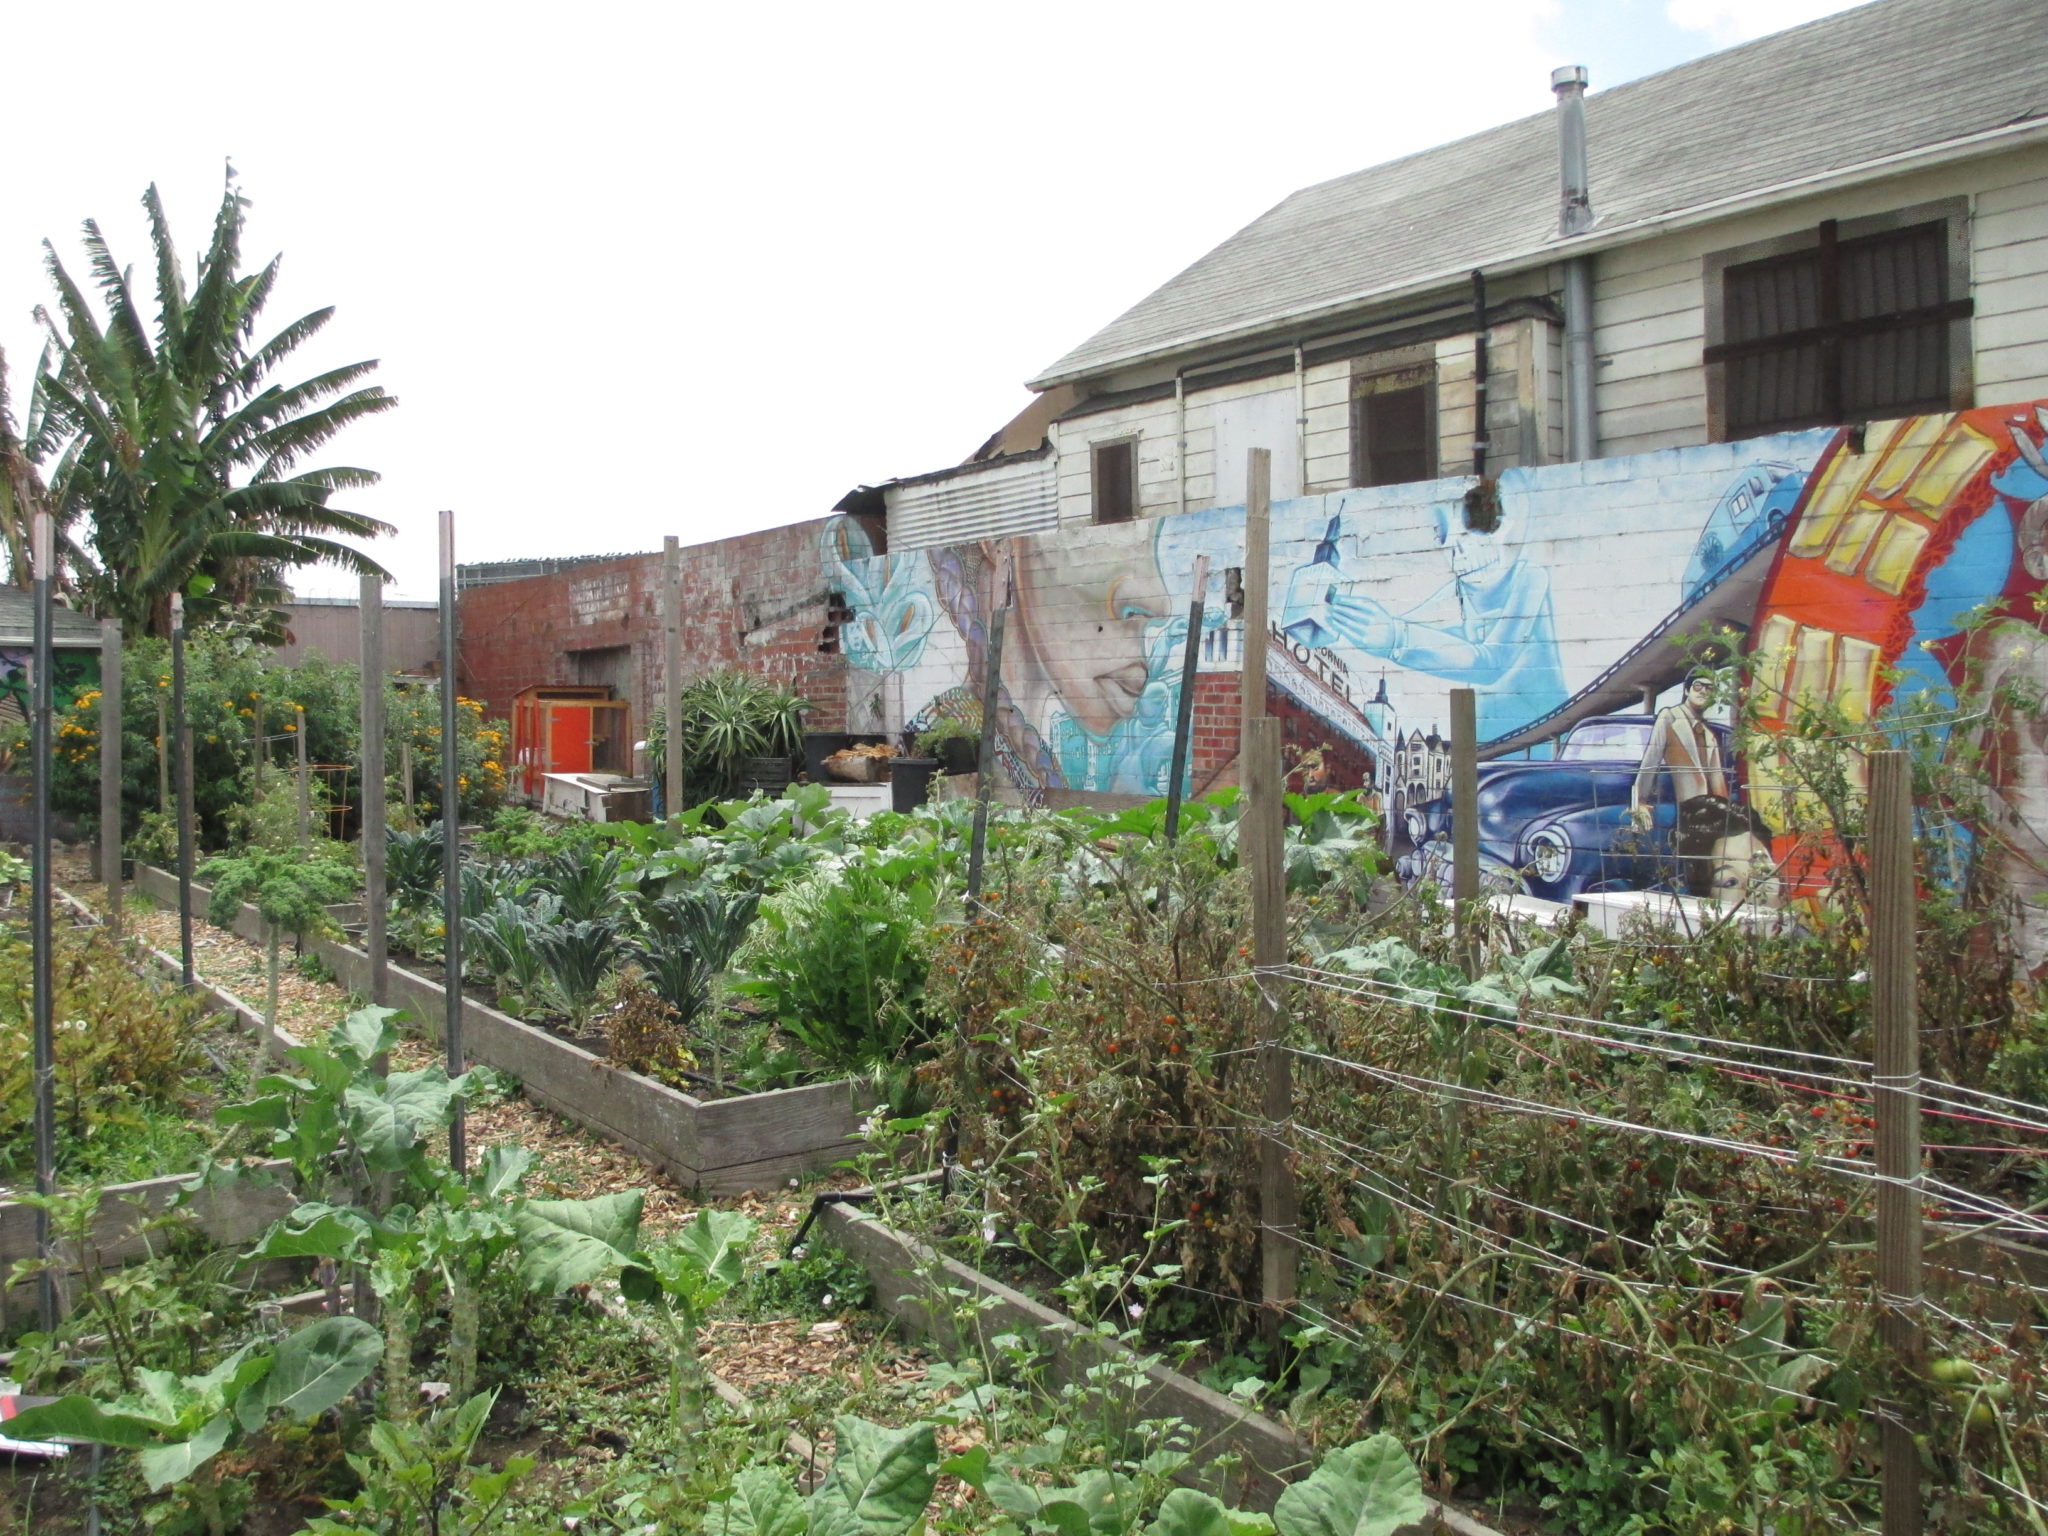 People's Grocery California Hotel Garden. Photo by: Joshua Arnold